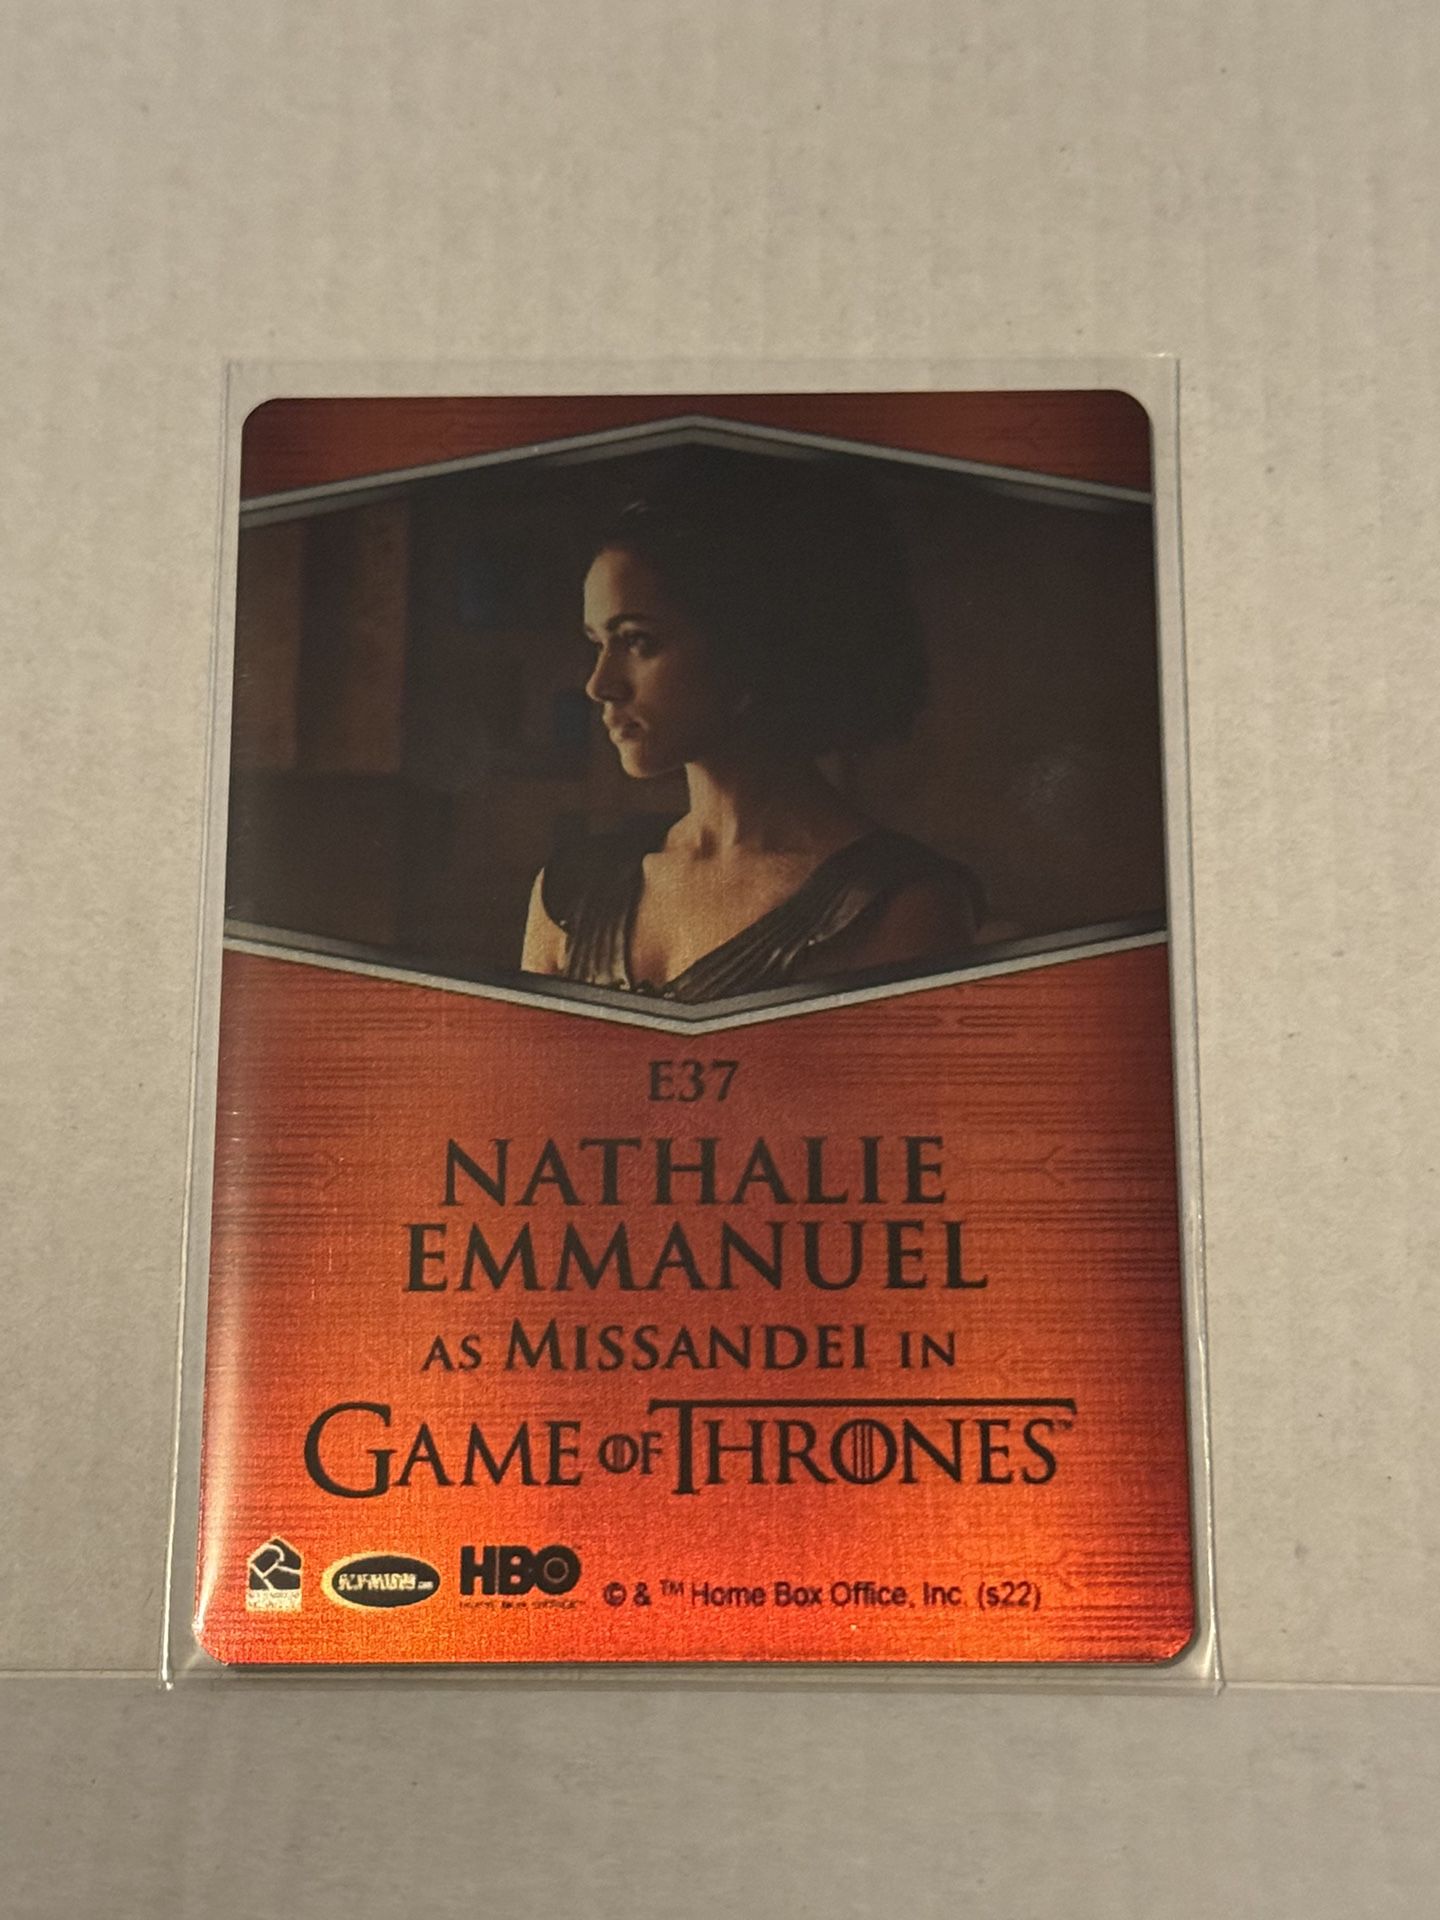 2019 Game of Thrones volume 2  E37 Metal Expression card